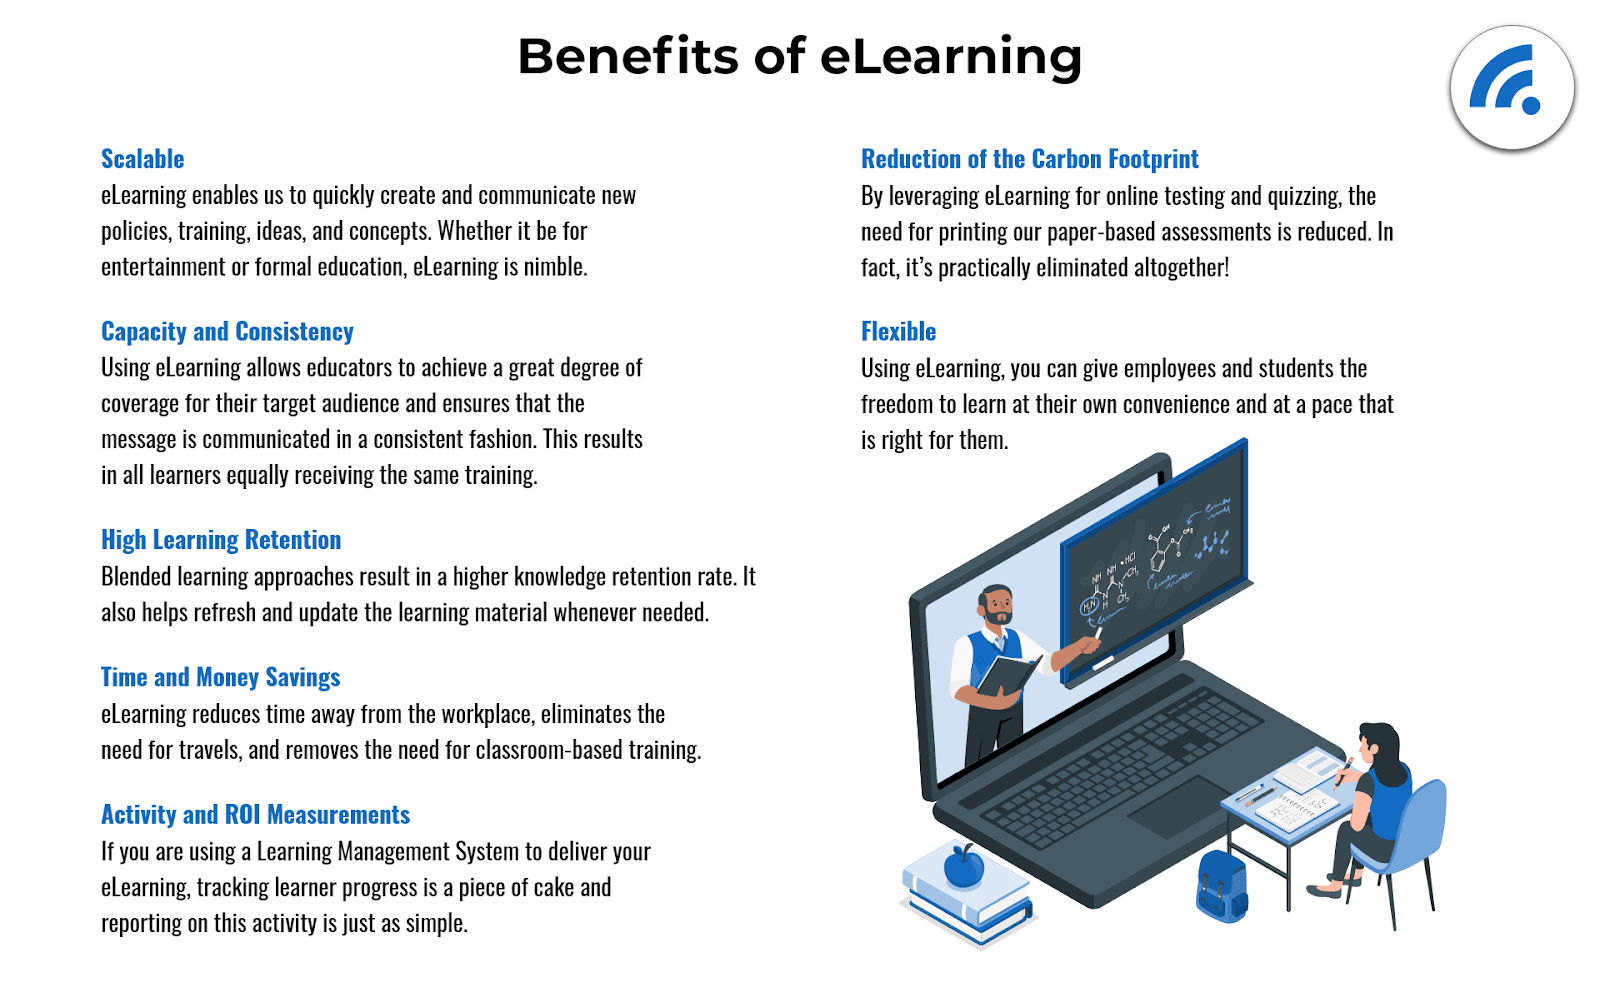 Benefits of eLearning